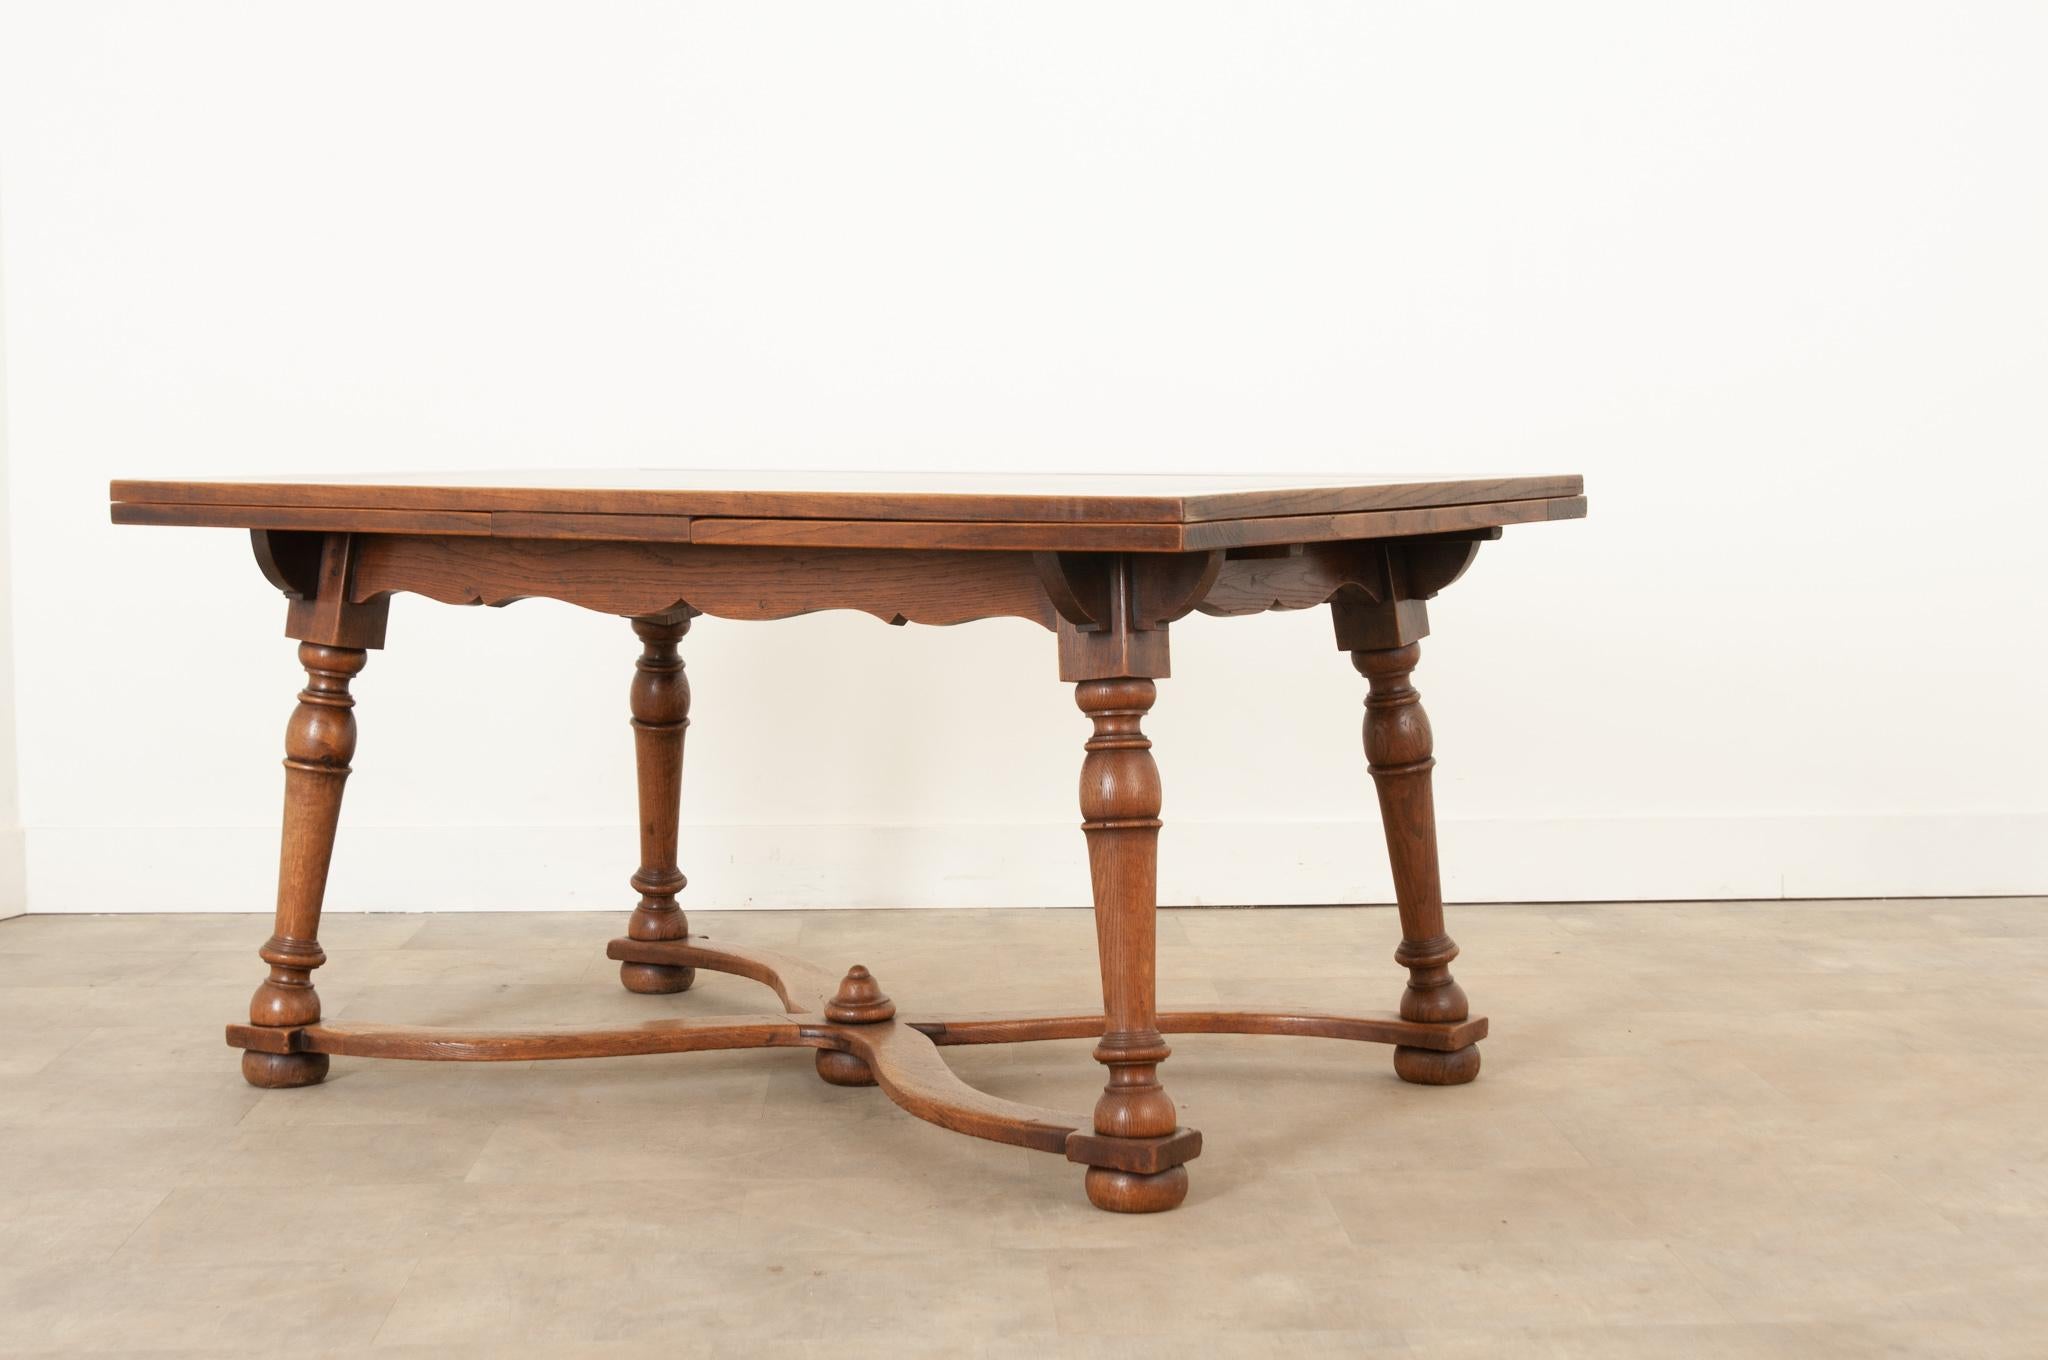 A wonderful Swiss draw leaf table crafted during the 1830s from solid oak with an inset slate top. The stone top is perfect for a hot tea kettle or pot as it will not be damaged, making this a great serving or dining table. Inset slate tops were a